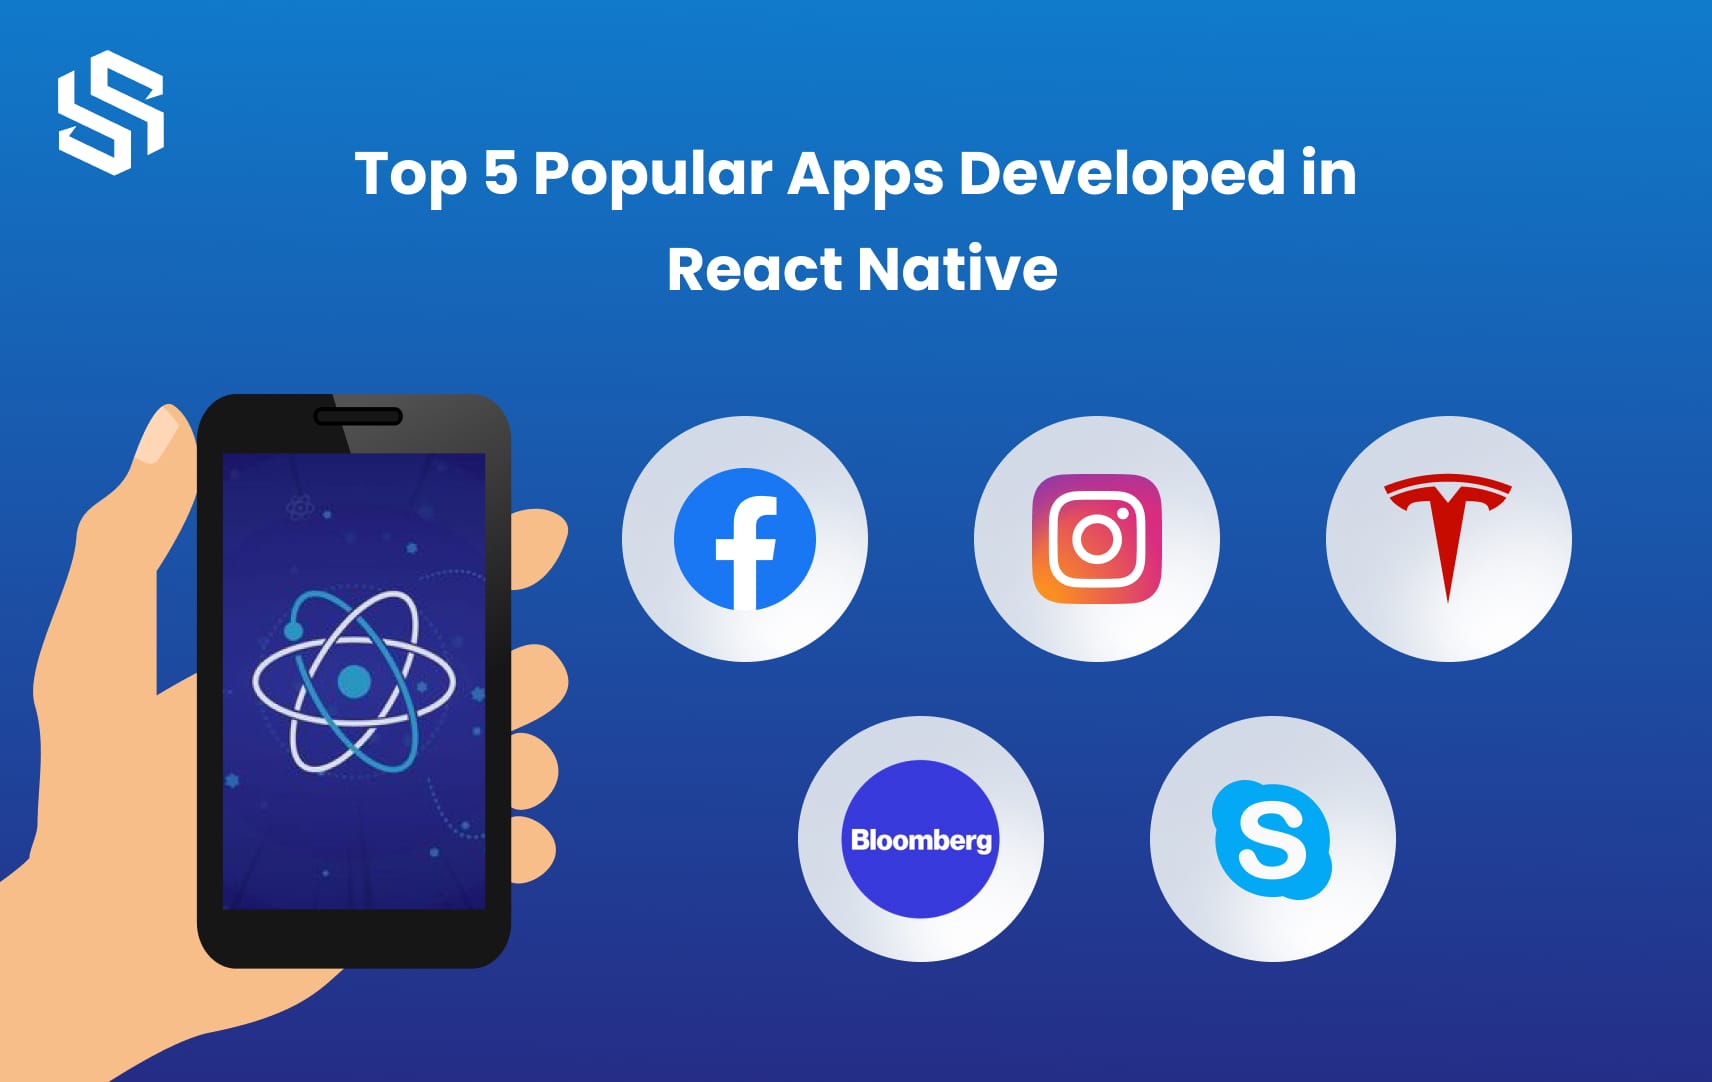 Top 5 Popular Apps Developed in React Native